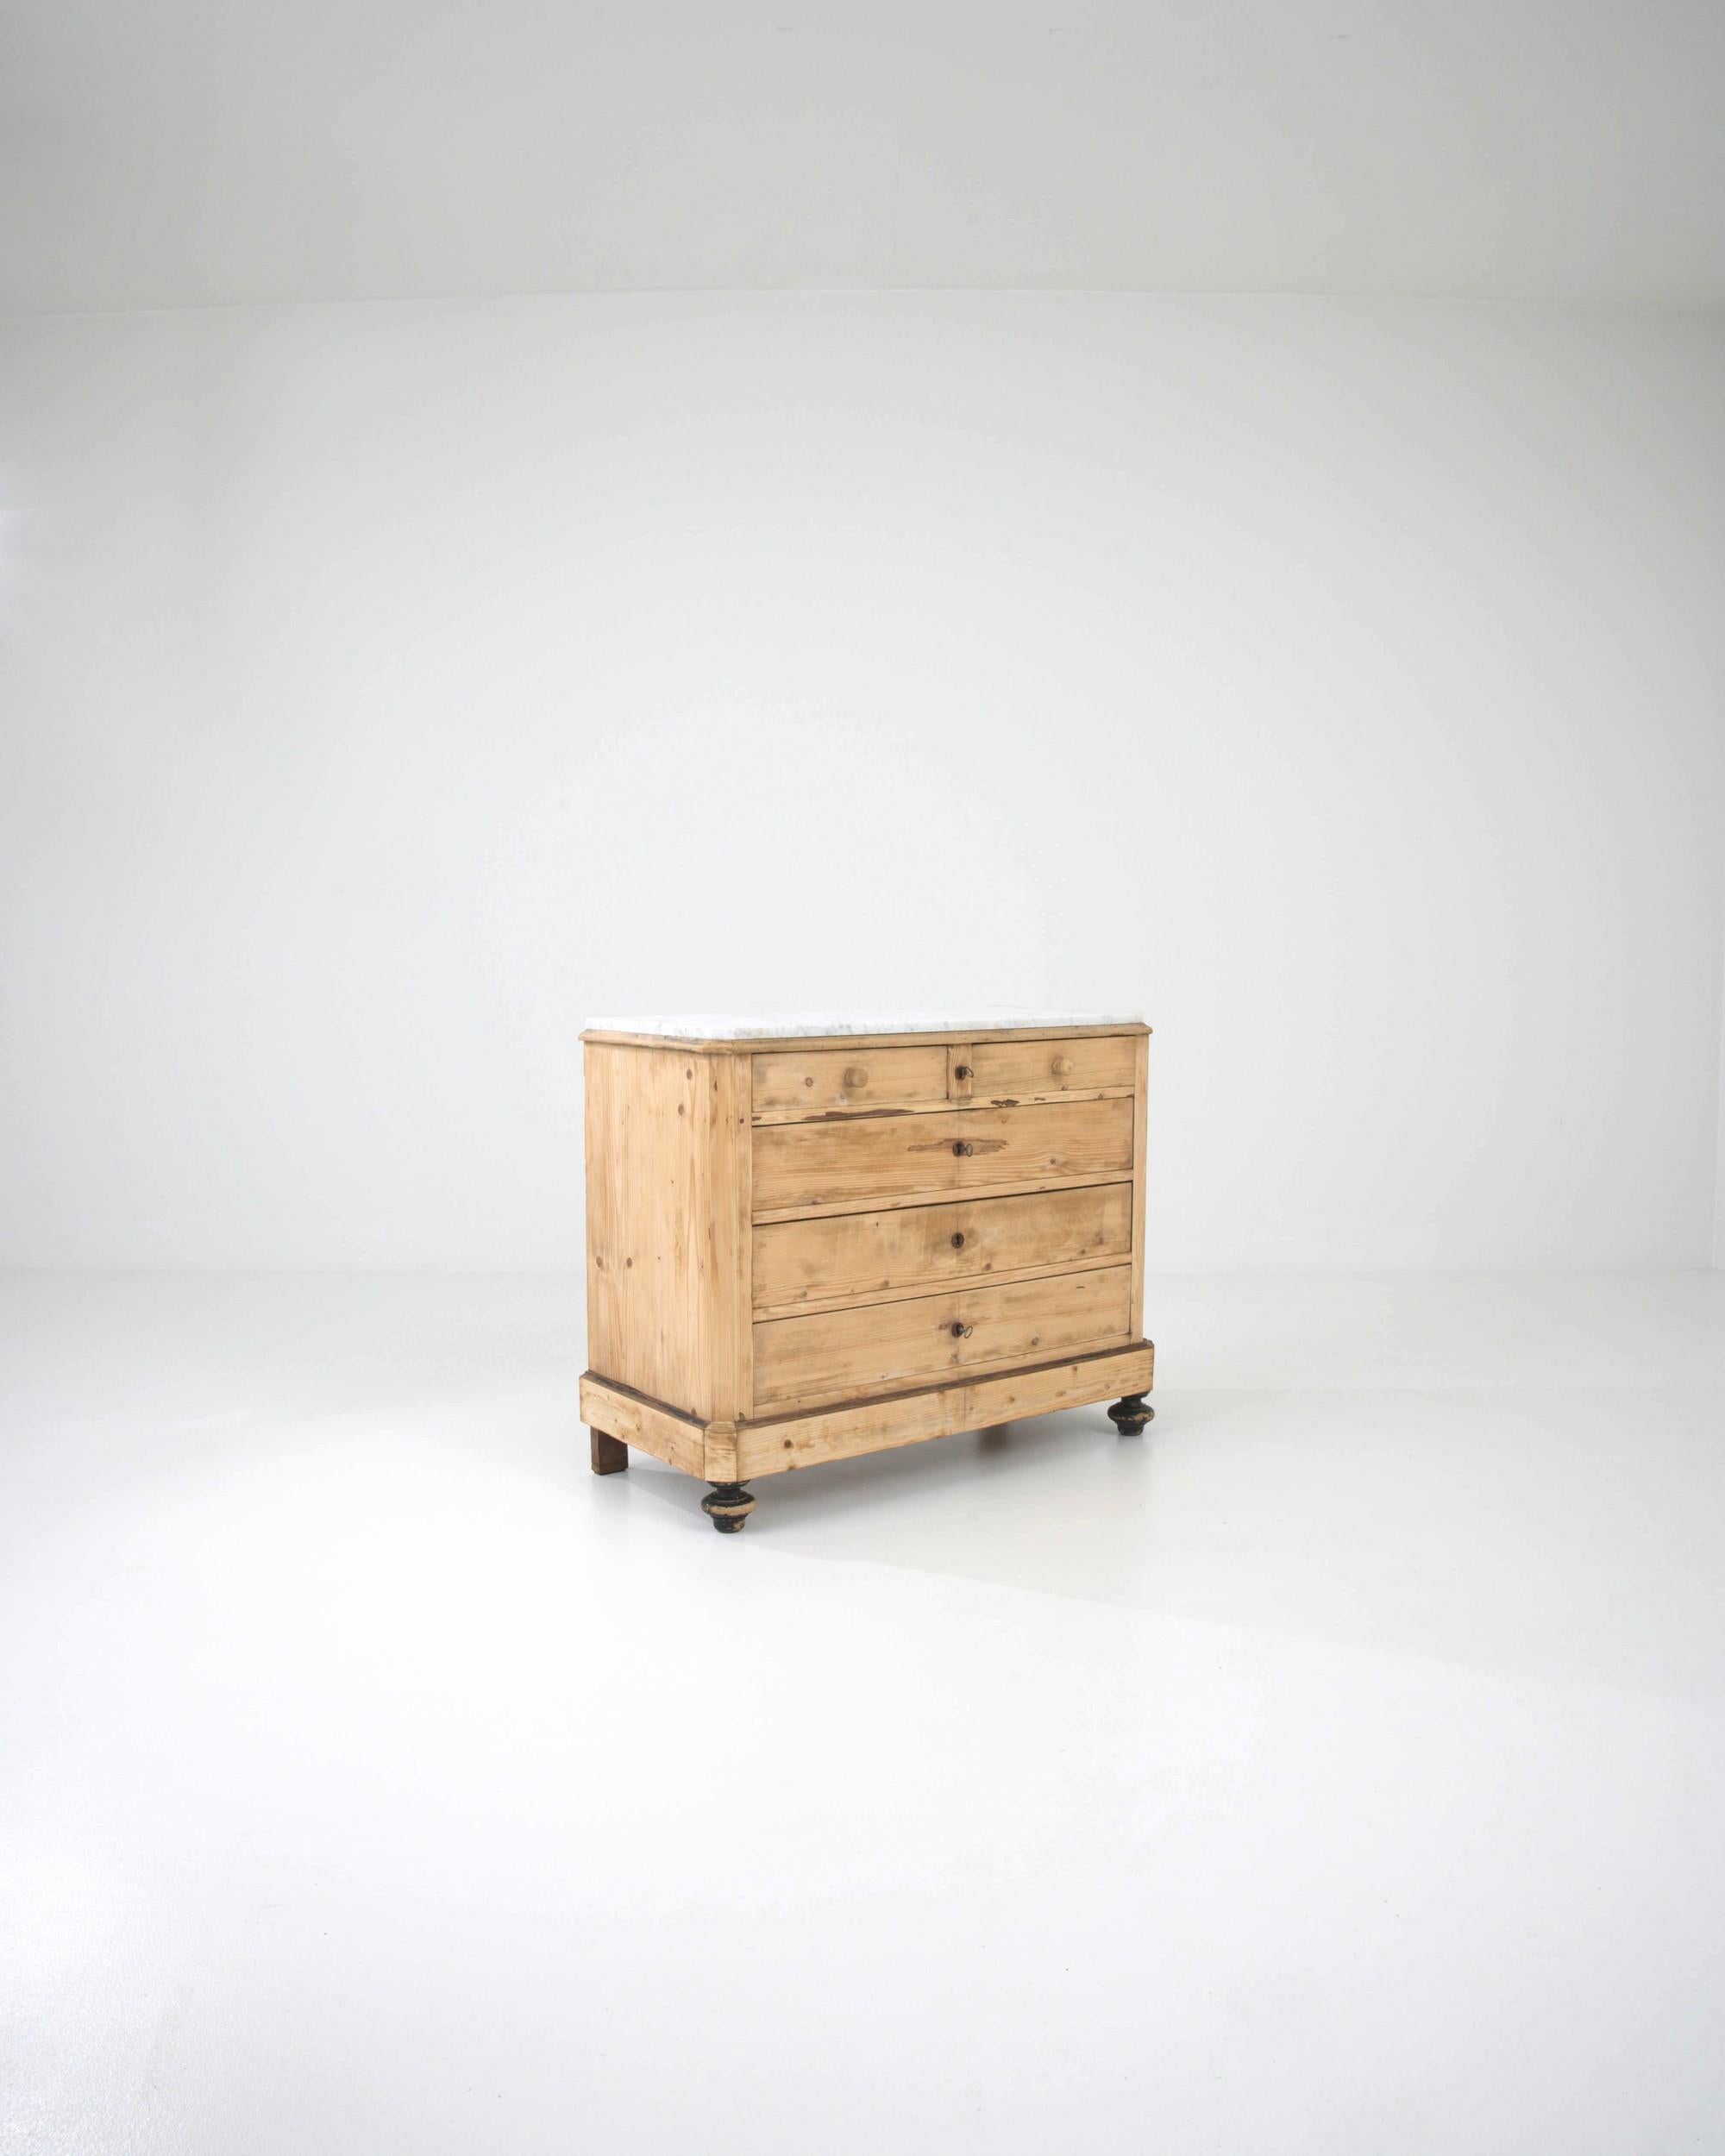 Combining a simple cabinet with a marble tabletop, this antique chest of drawers strikes an attractive balance between the homey and the luxurious. Made in France in the 1800s, the design of the case is clean and unornamented. Faceted corners lend